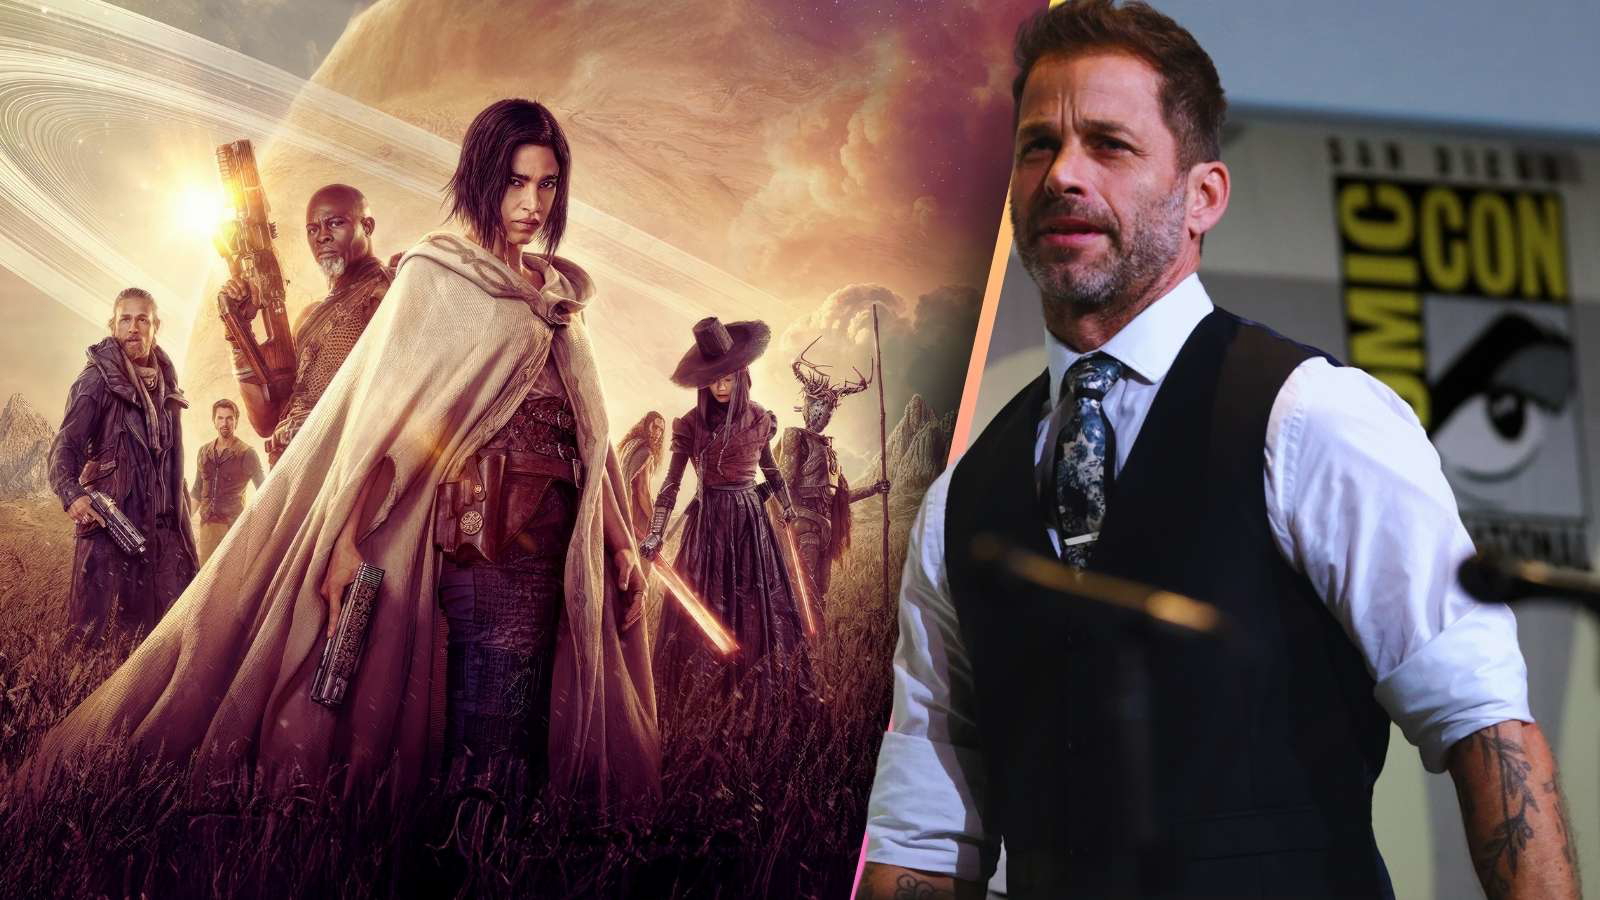 “It was really making four movies”: Insane Amount of Work Zack Snyder Did to Bring His Rebel Moon Saga On-screen Will Make Even the Workaholics Quake in Their Boots